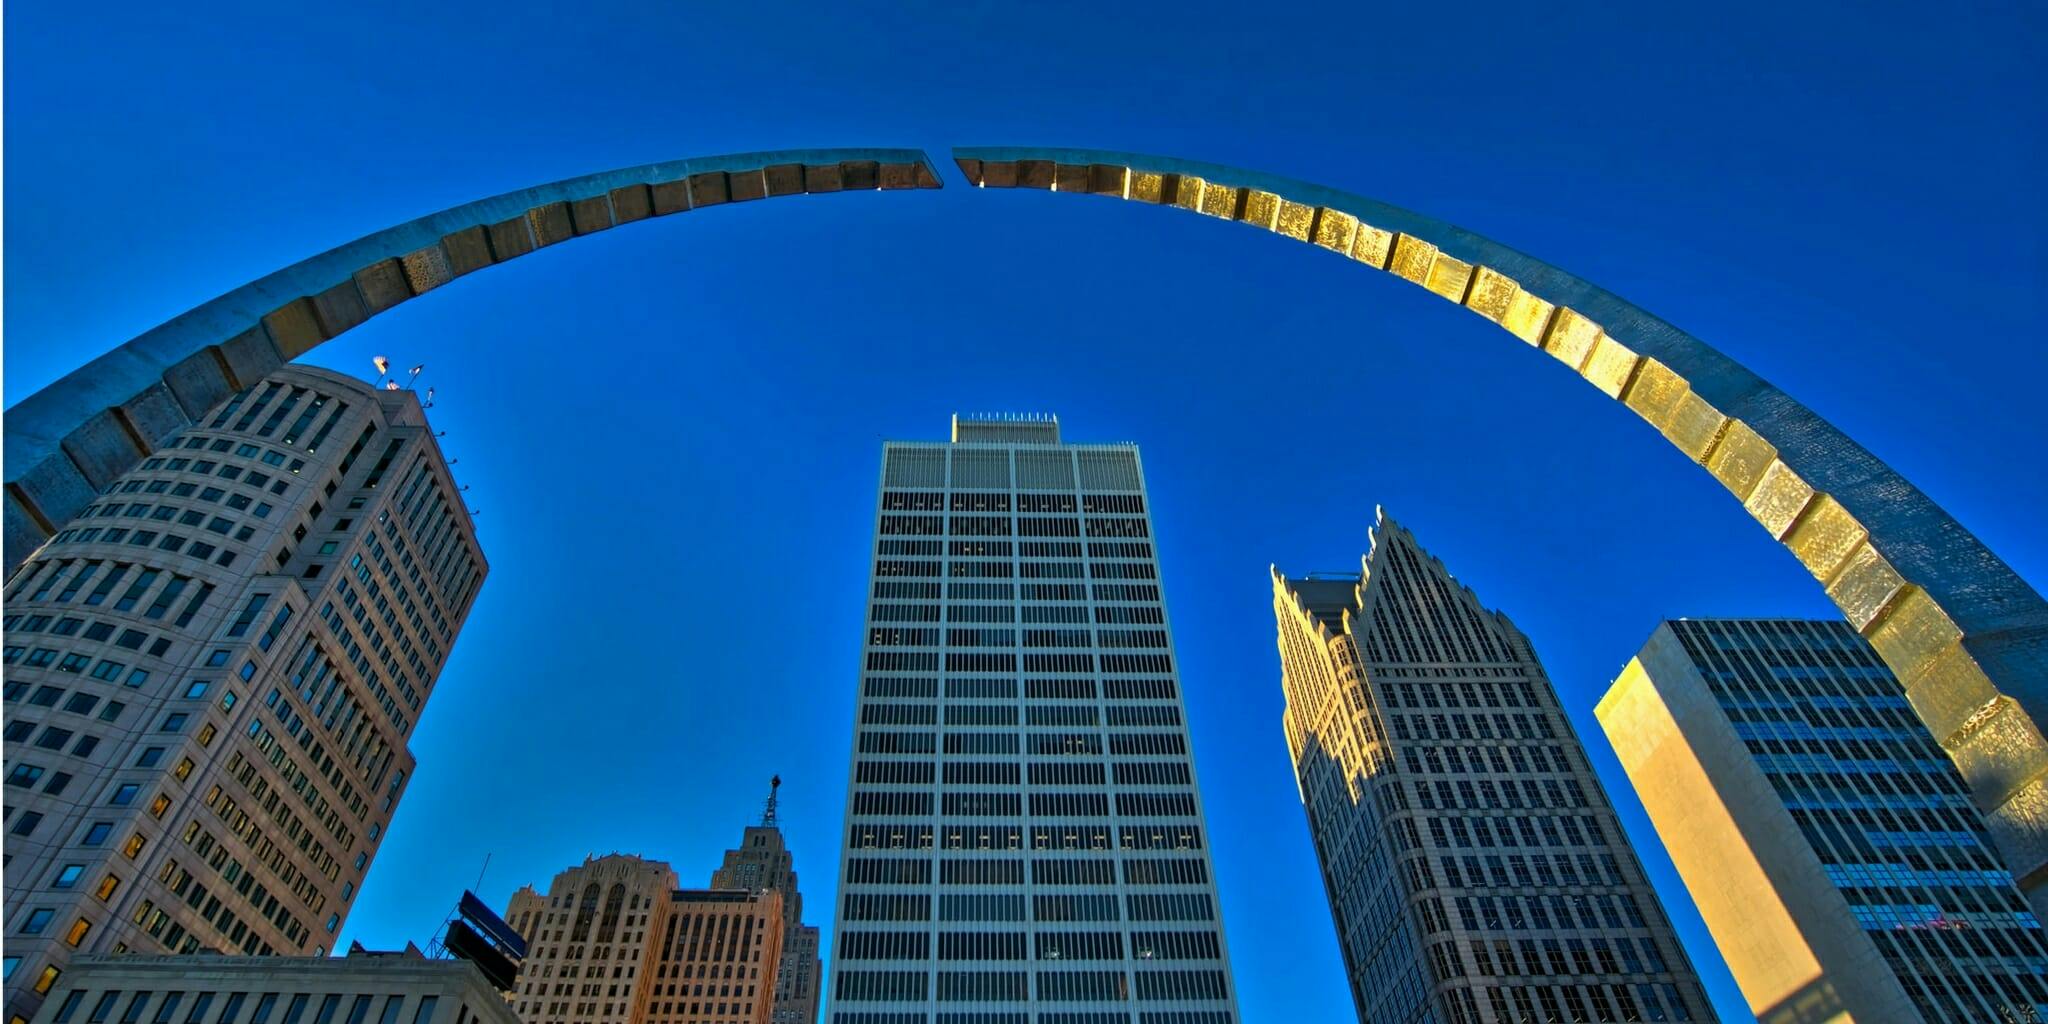 The Hart Plaza Arch in Detroit Michigan